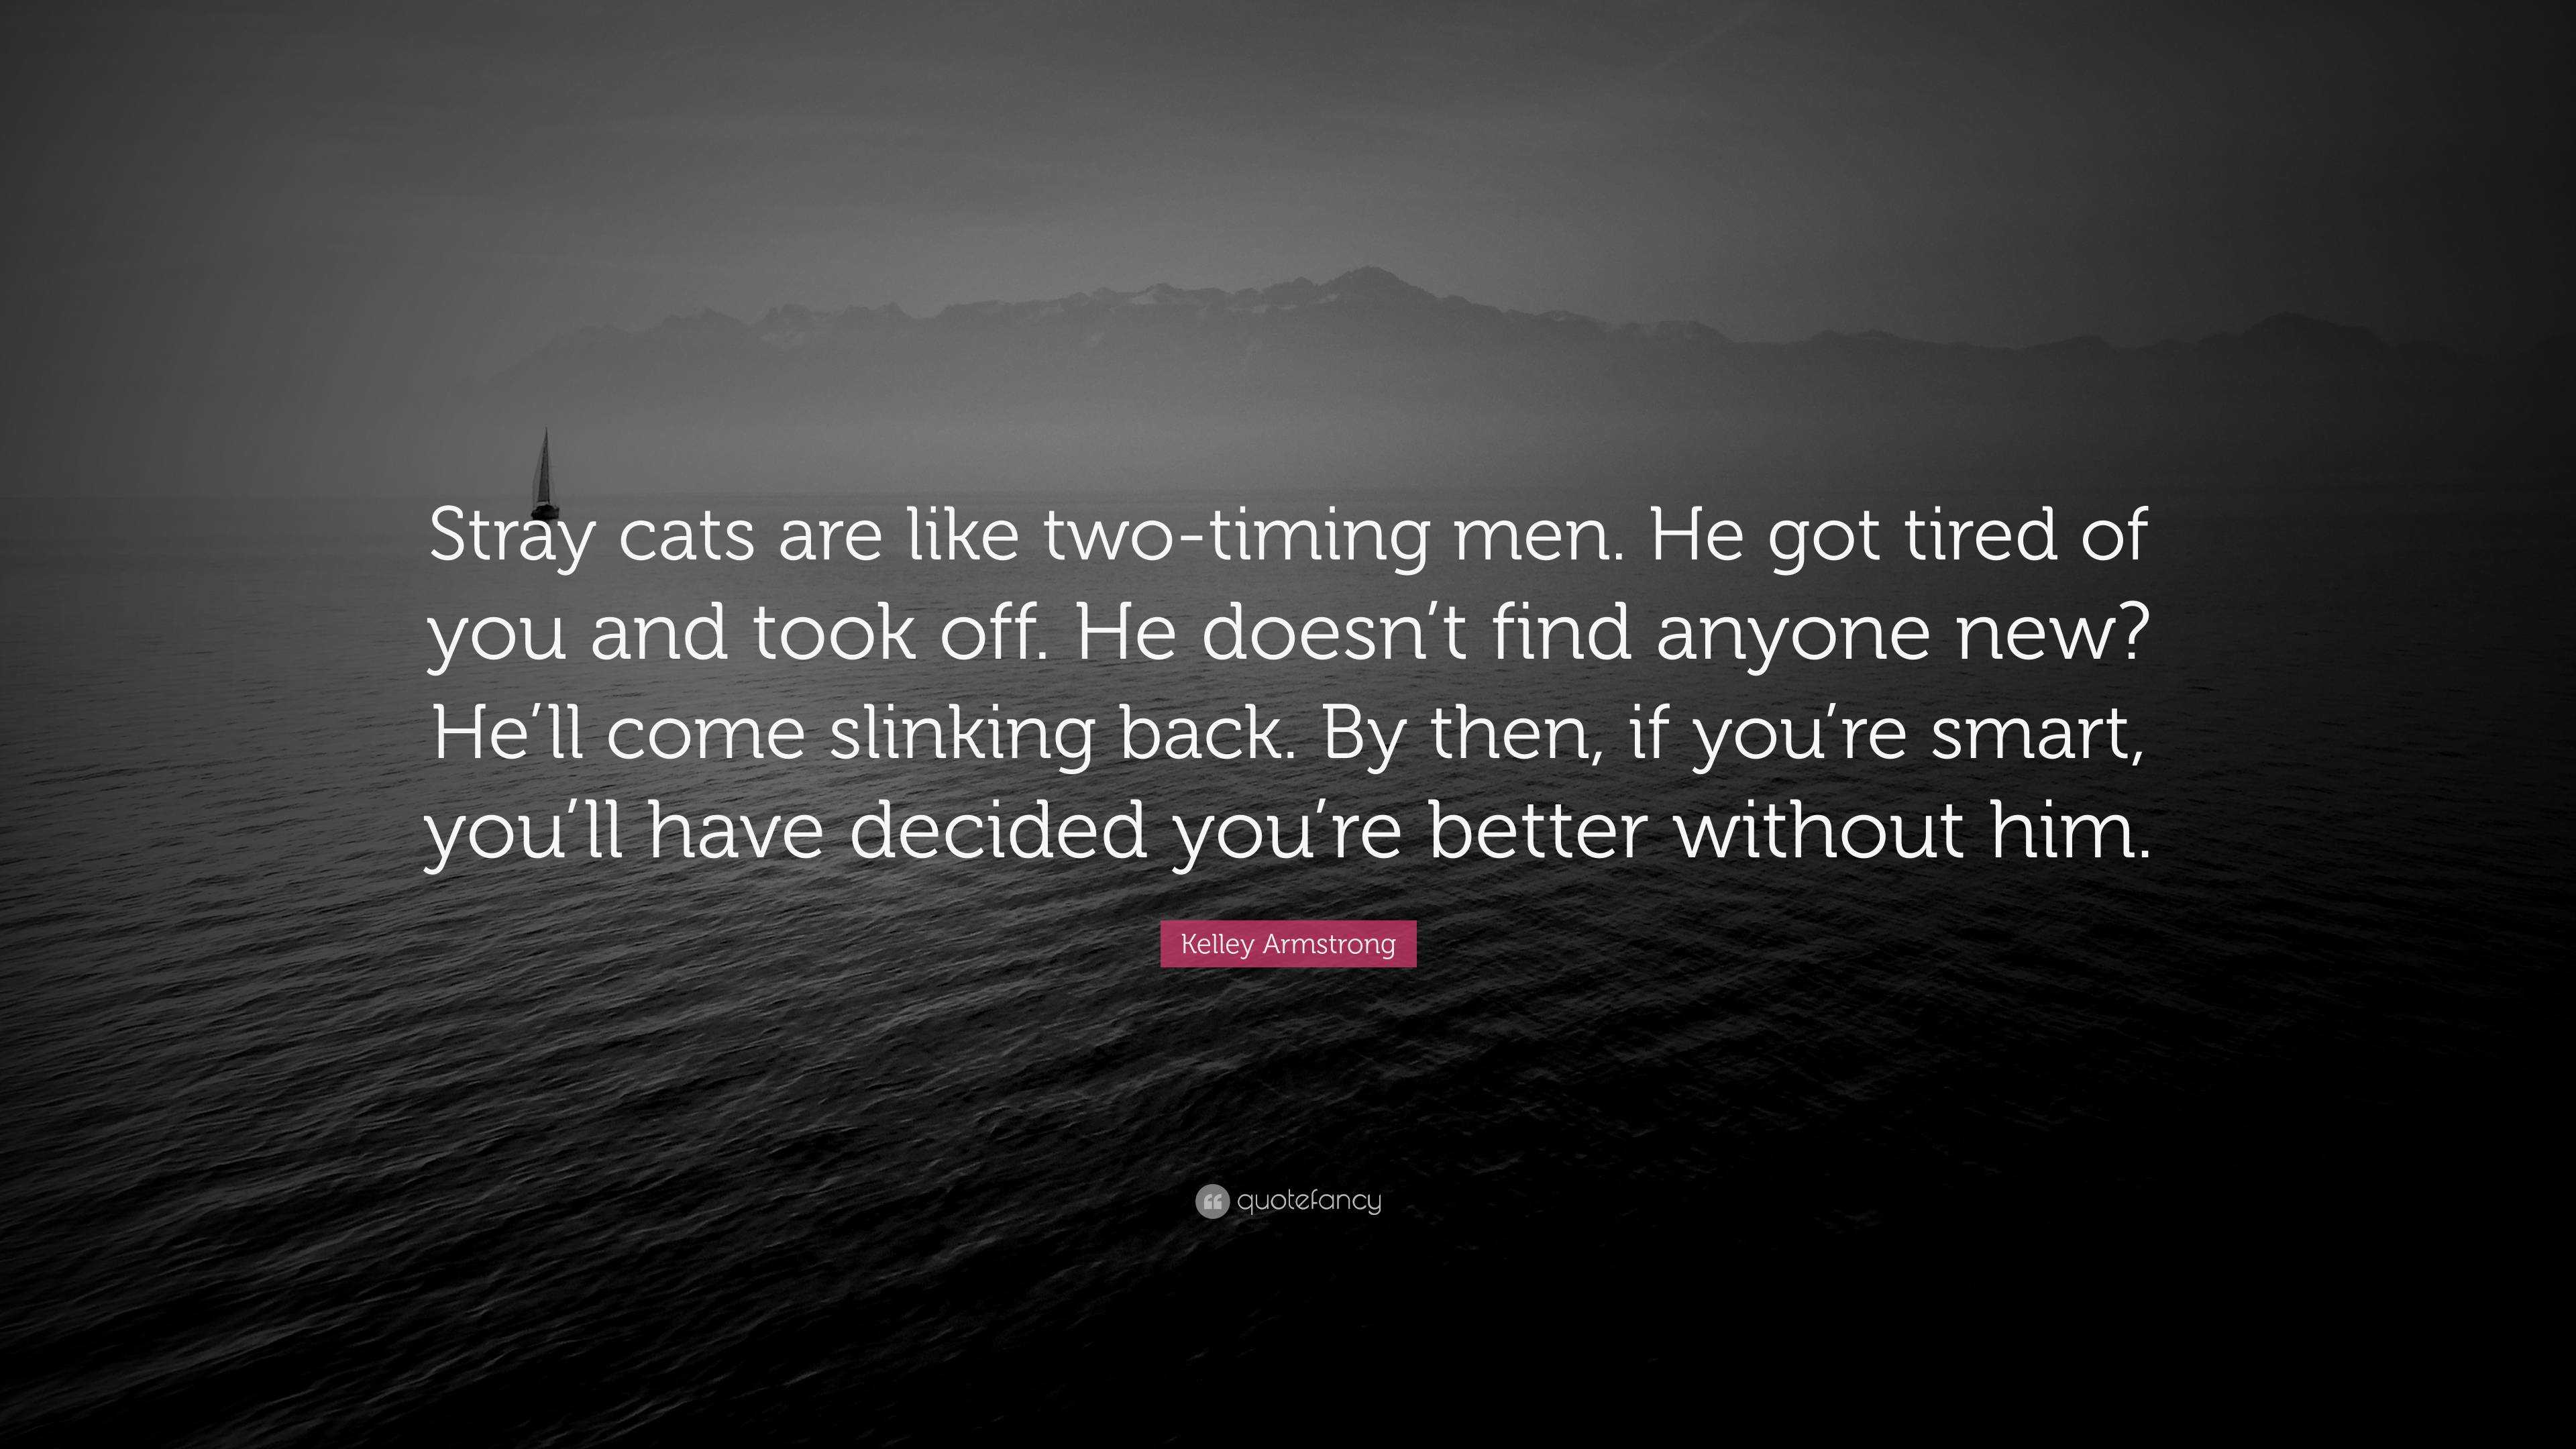 Kelley Armstrong Quote: “Stray cats are like two-timing men. He